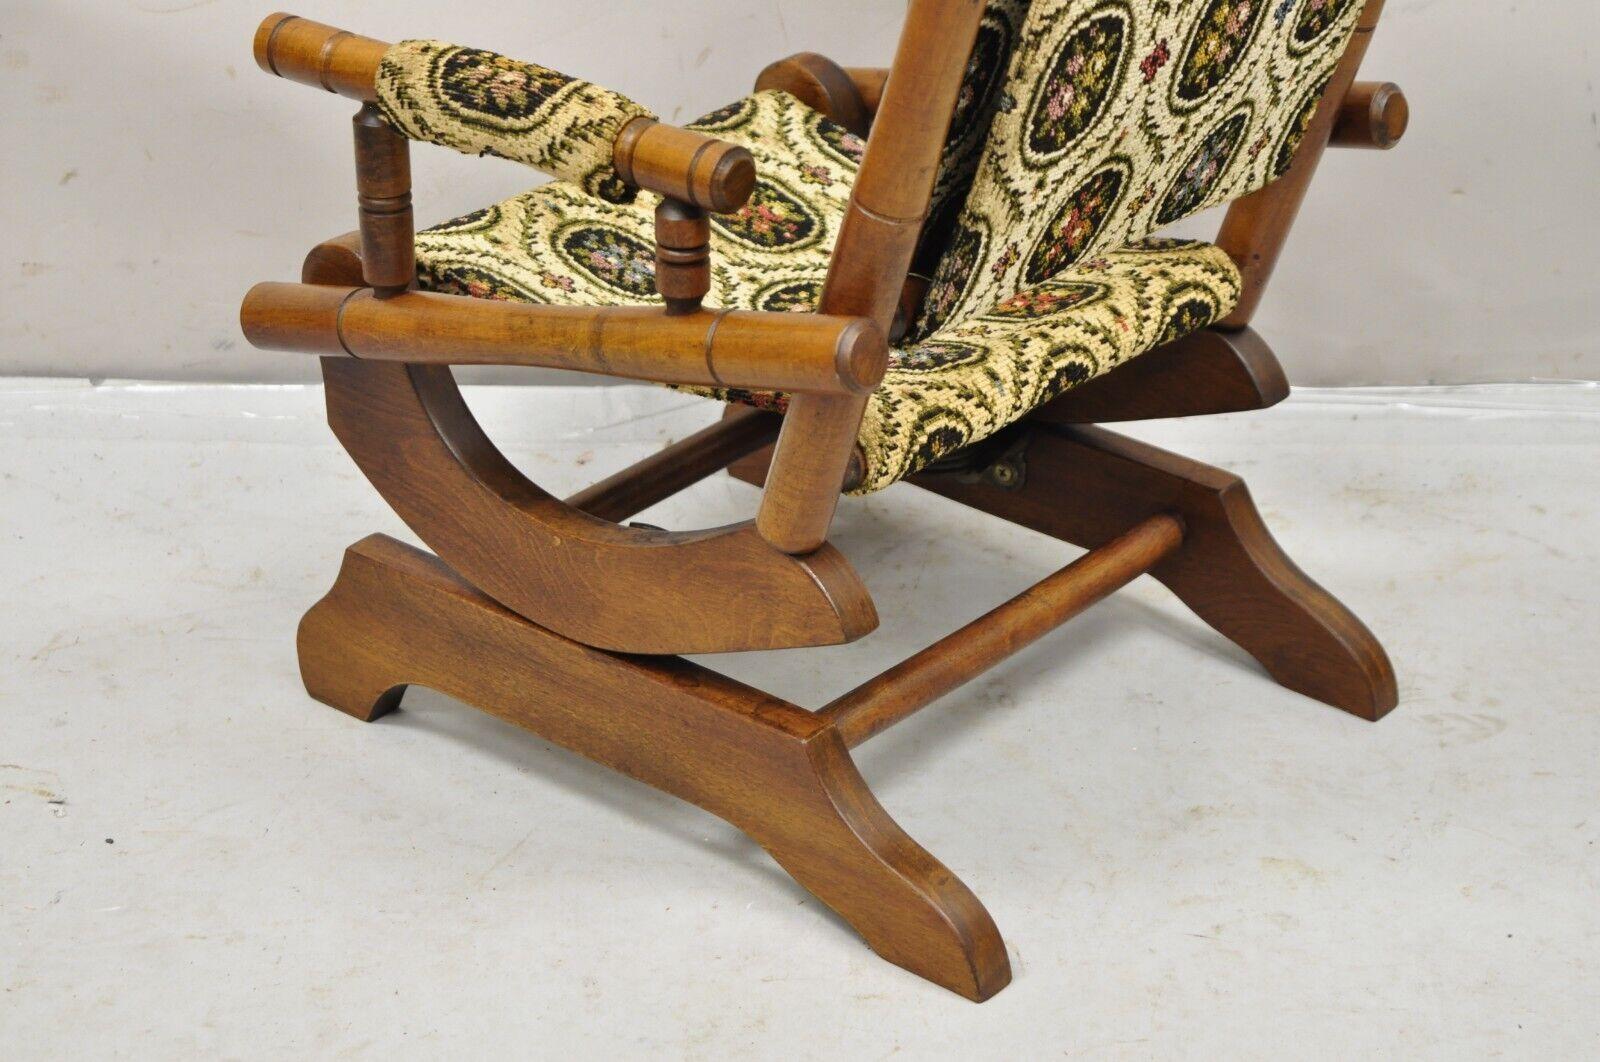 Early 20th Century Antique Victorian Small Child's Maple Wood Platform Rocker Rocking Chair For Sale